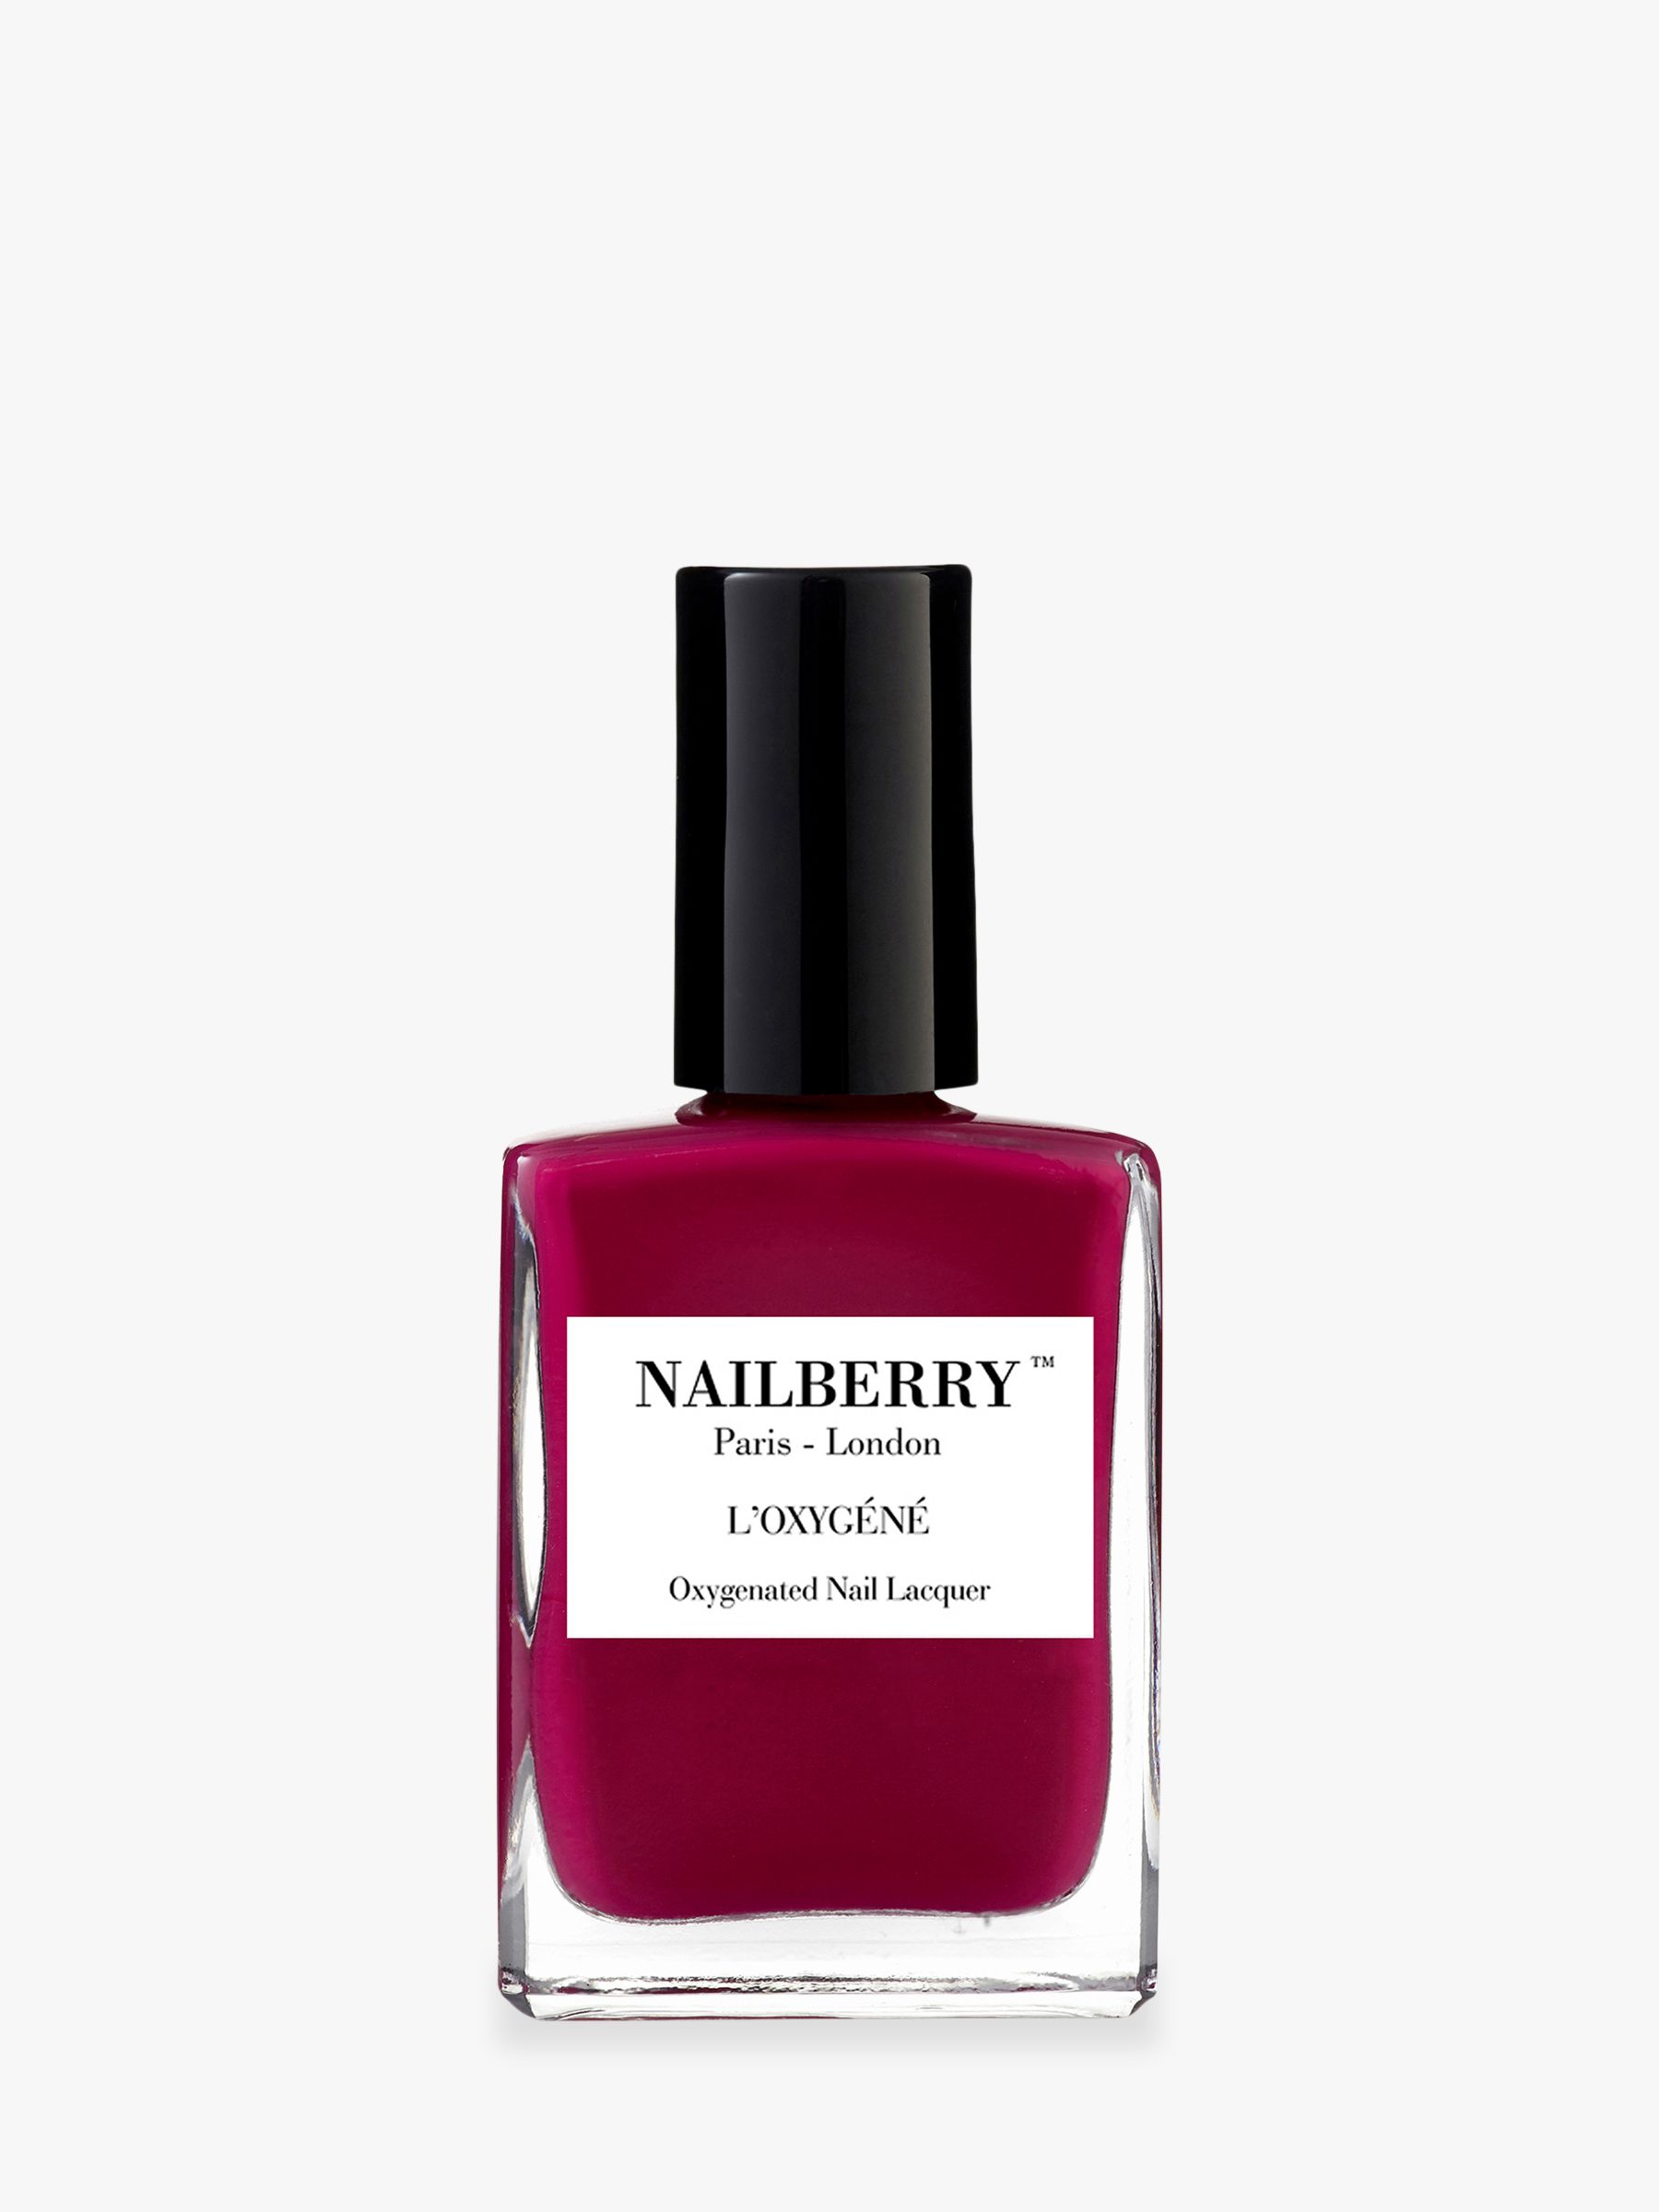 Nailberry L'Oxygéné Oxygenated Nail Lacquer, Raspberry